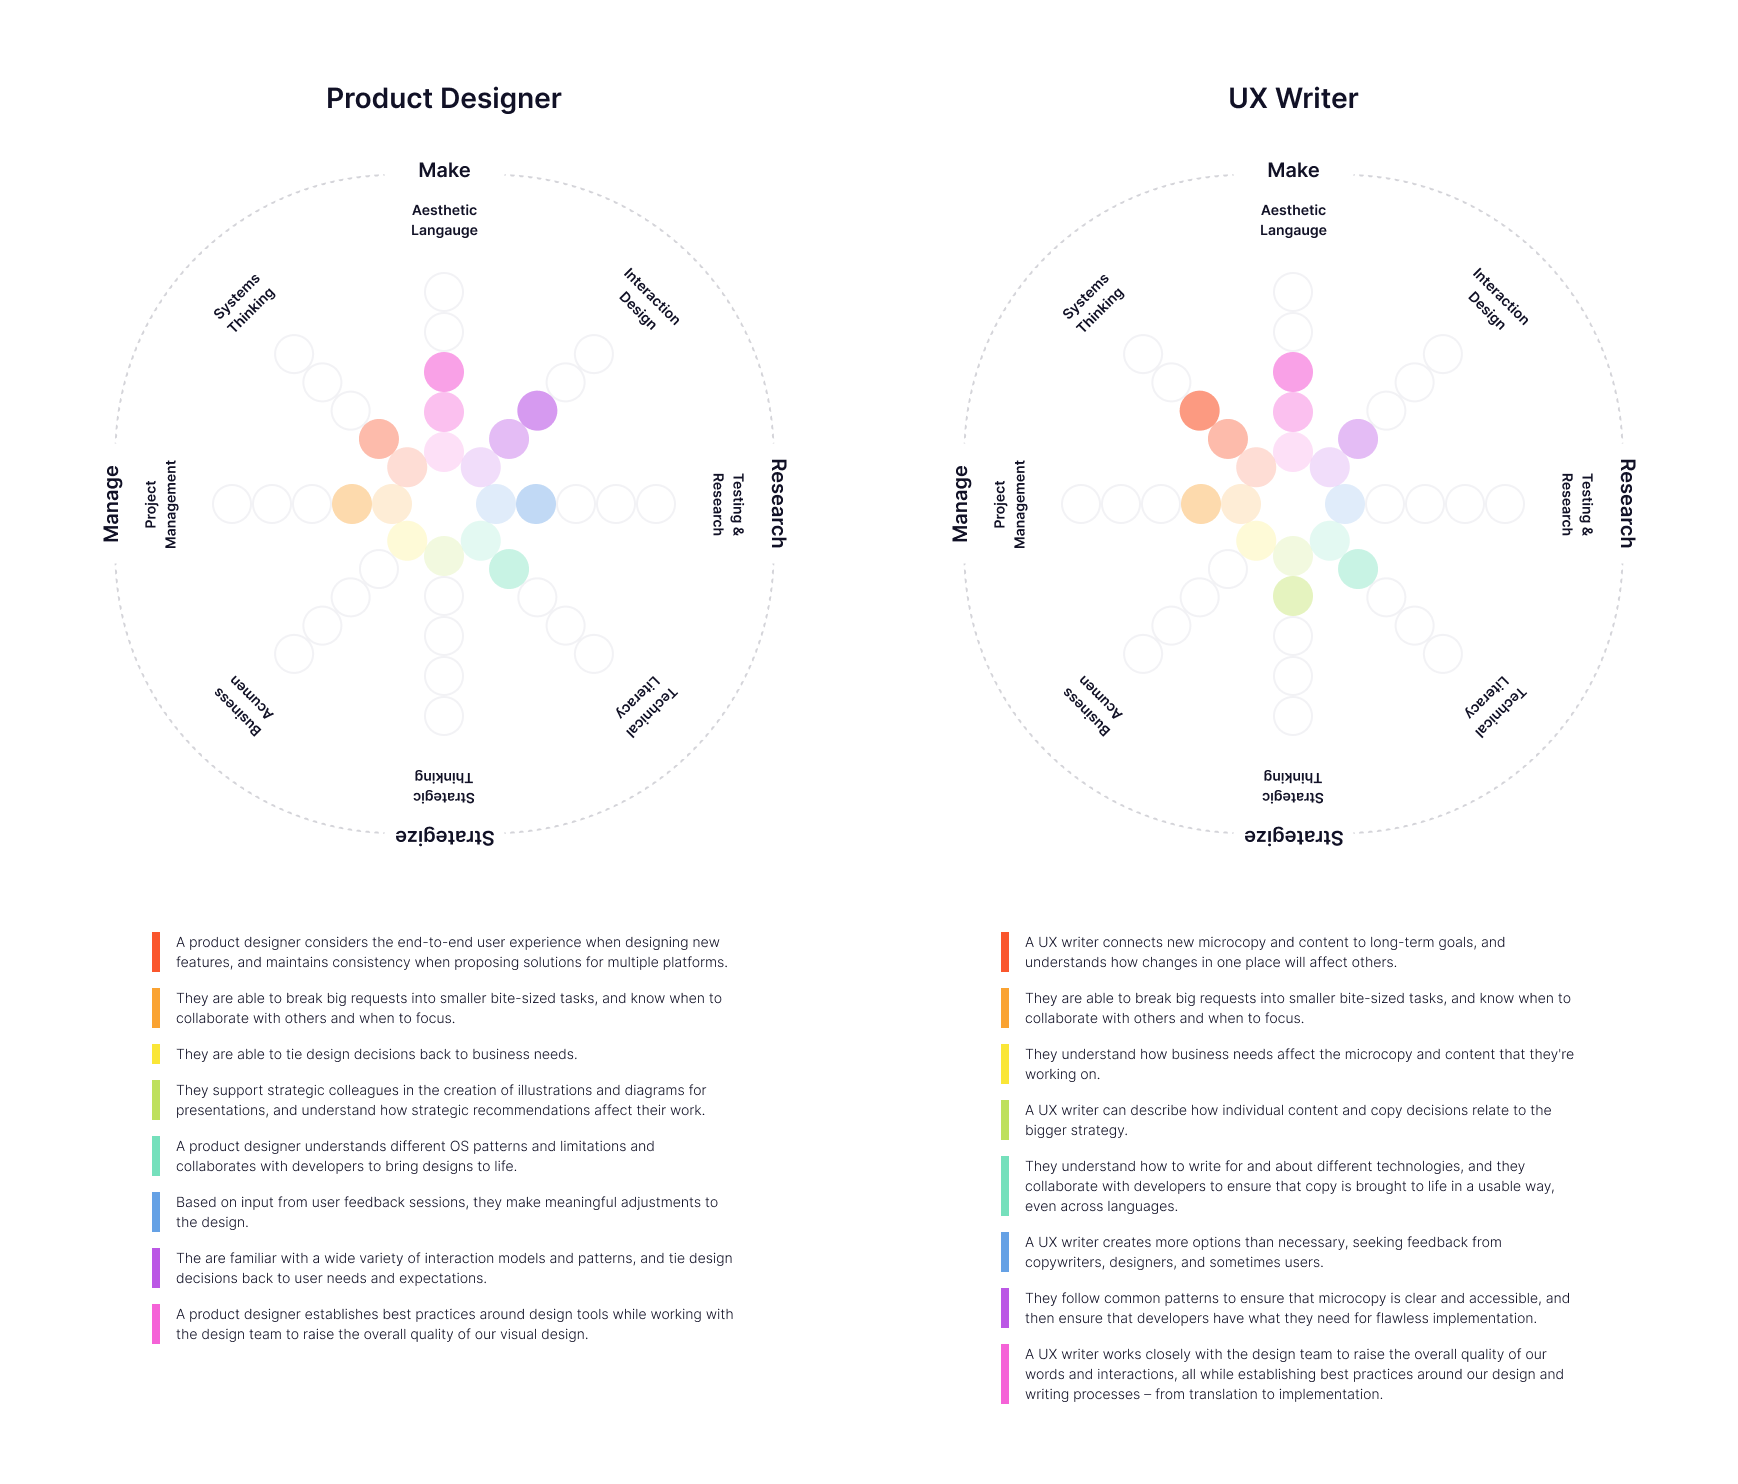 A side-by-side visualization of expectations for Product Designer and UX Writer roles